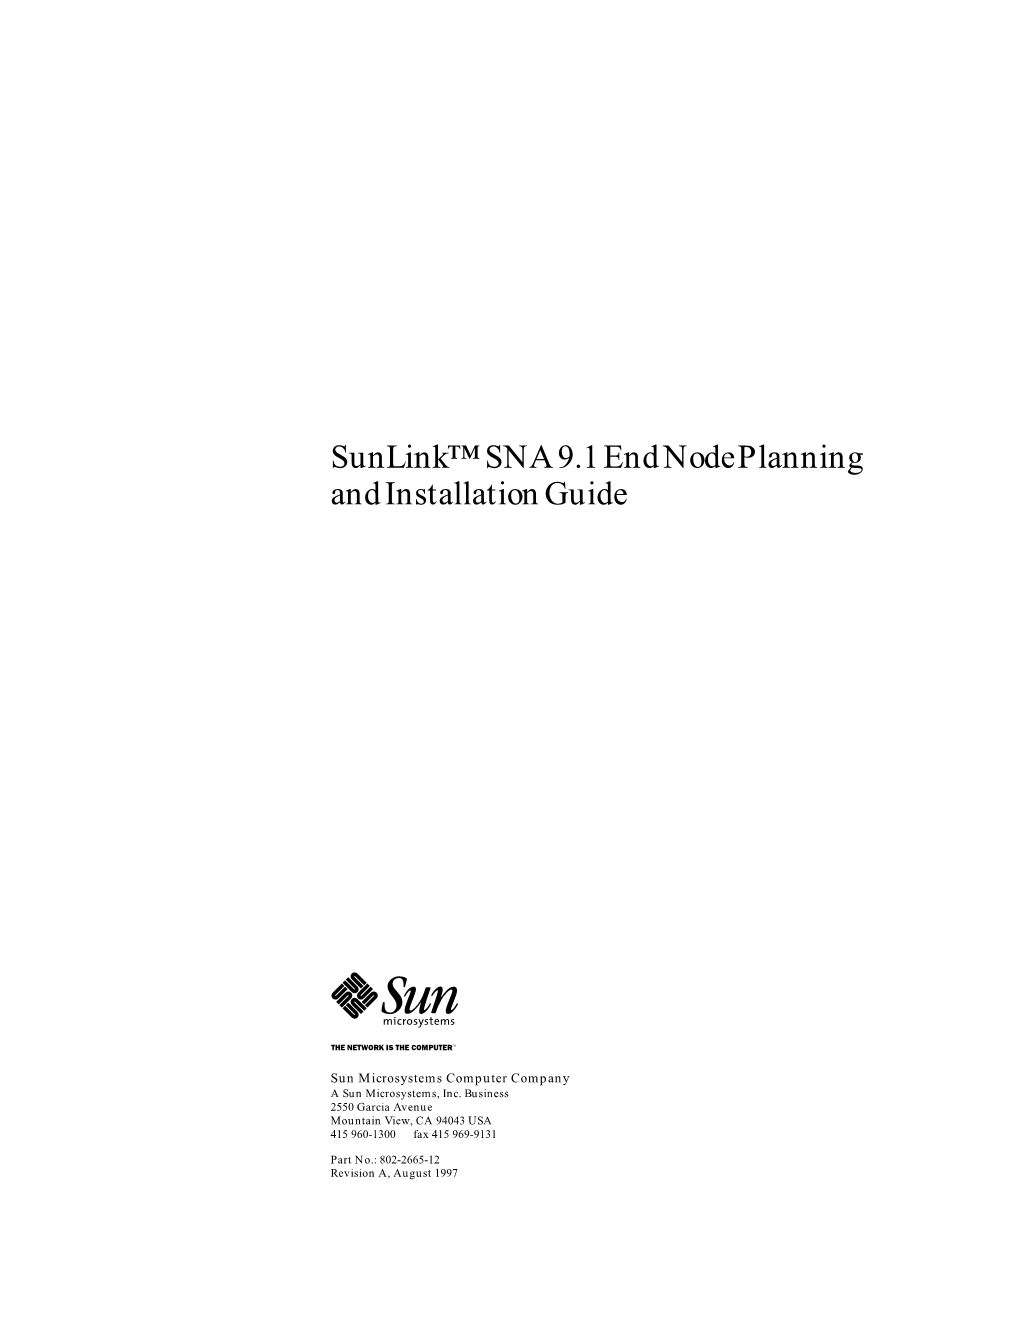 Sunlink SNA 9.1 End Node Planning and Installation Guide—August 1997 2.3.4 Multi-Station Access Units